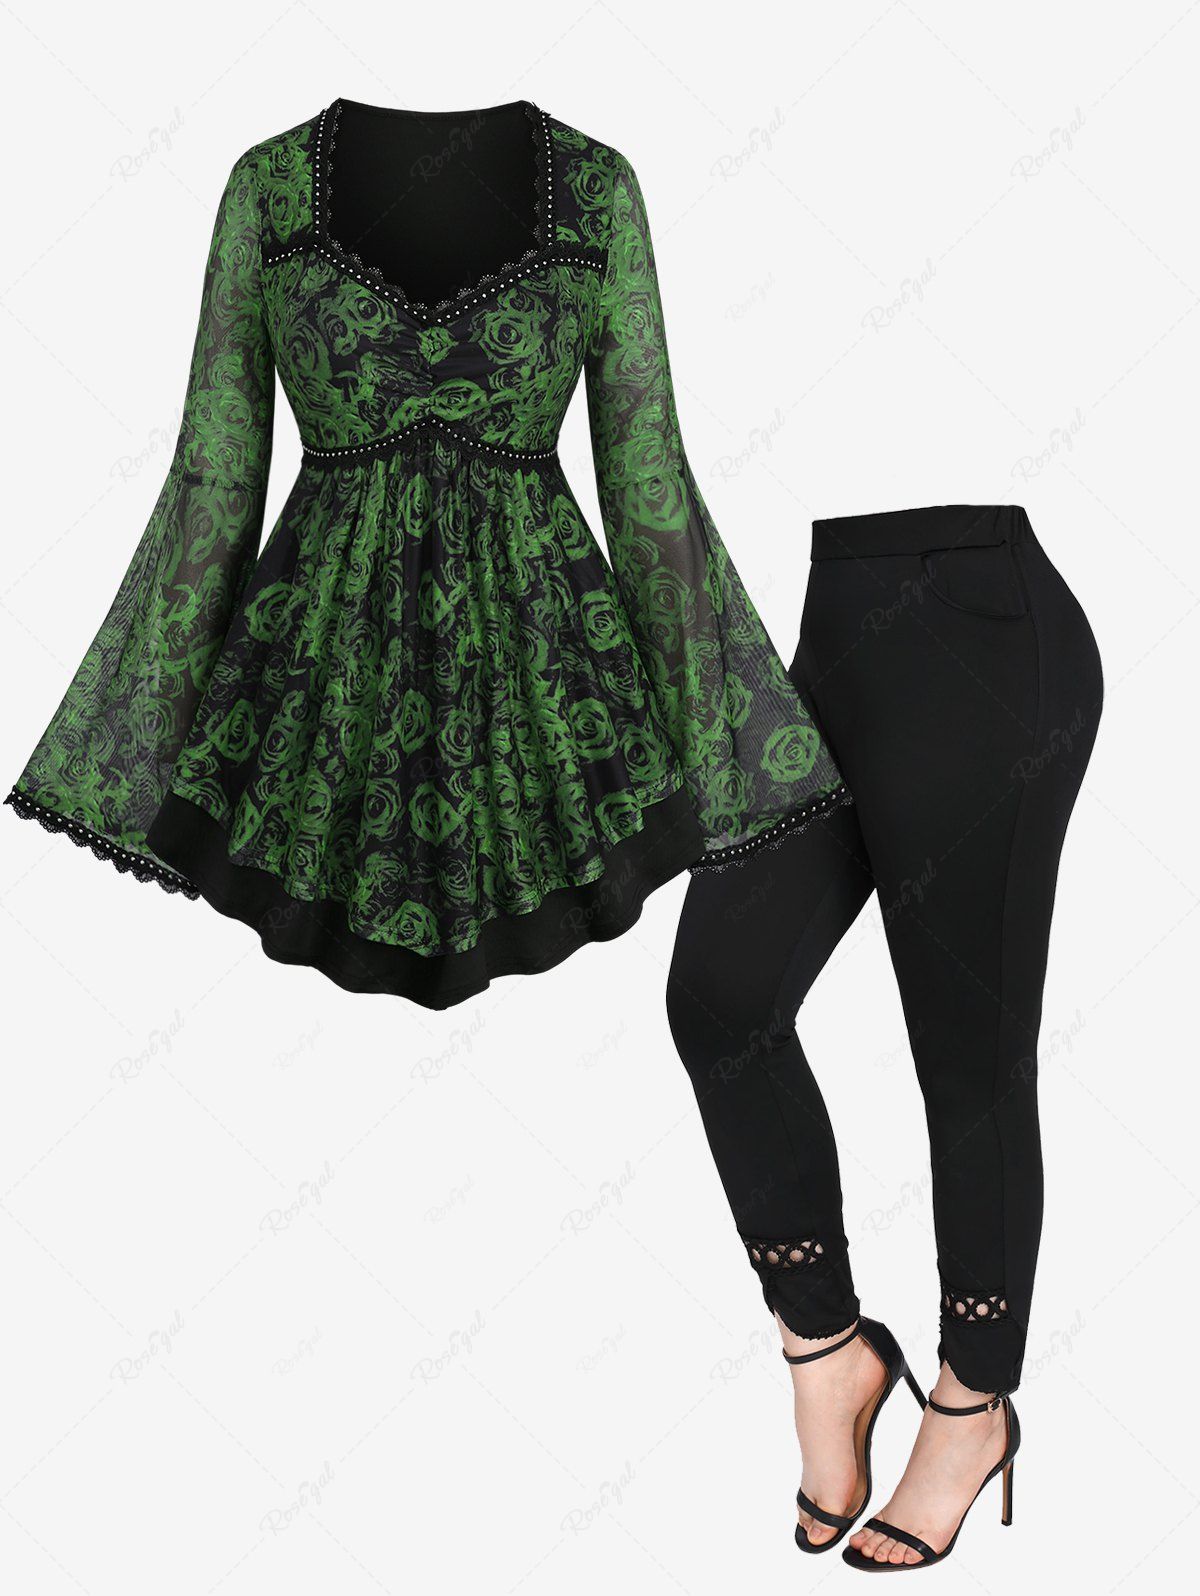 New Rose Flowers Printed Rivet Lace Trim Ruched Patchwork Bell Sleeve Top and Hollow Out Lace Trim Pockets Leggings Plus Size Outfit  